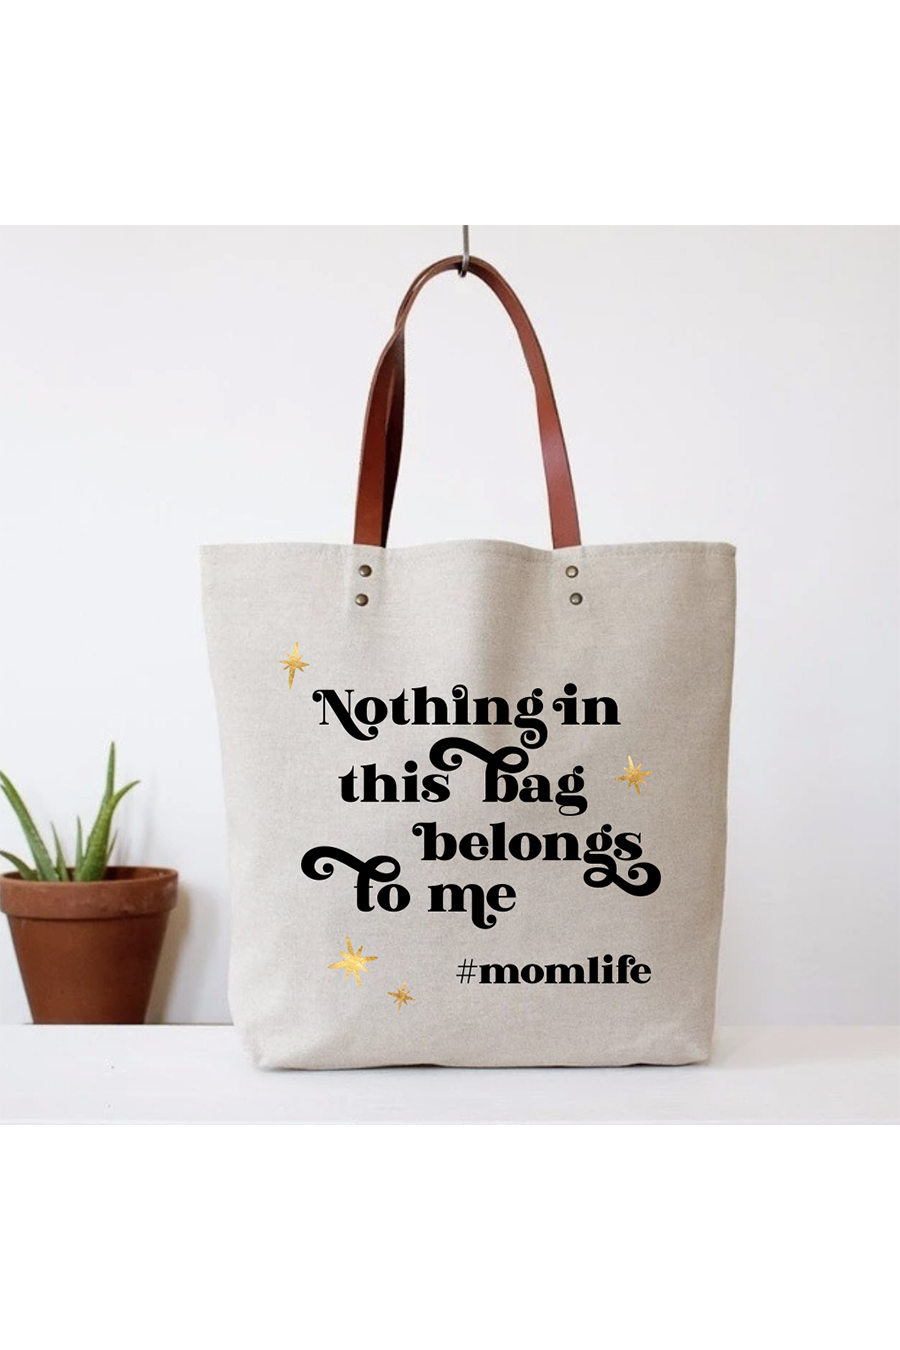 Hashtag Mom Life Tote - Main Image Number 1 of 1